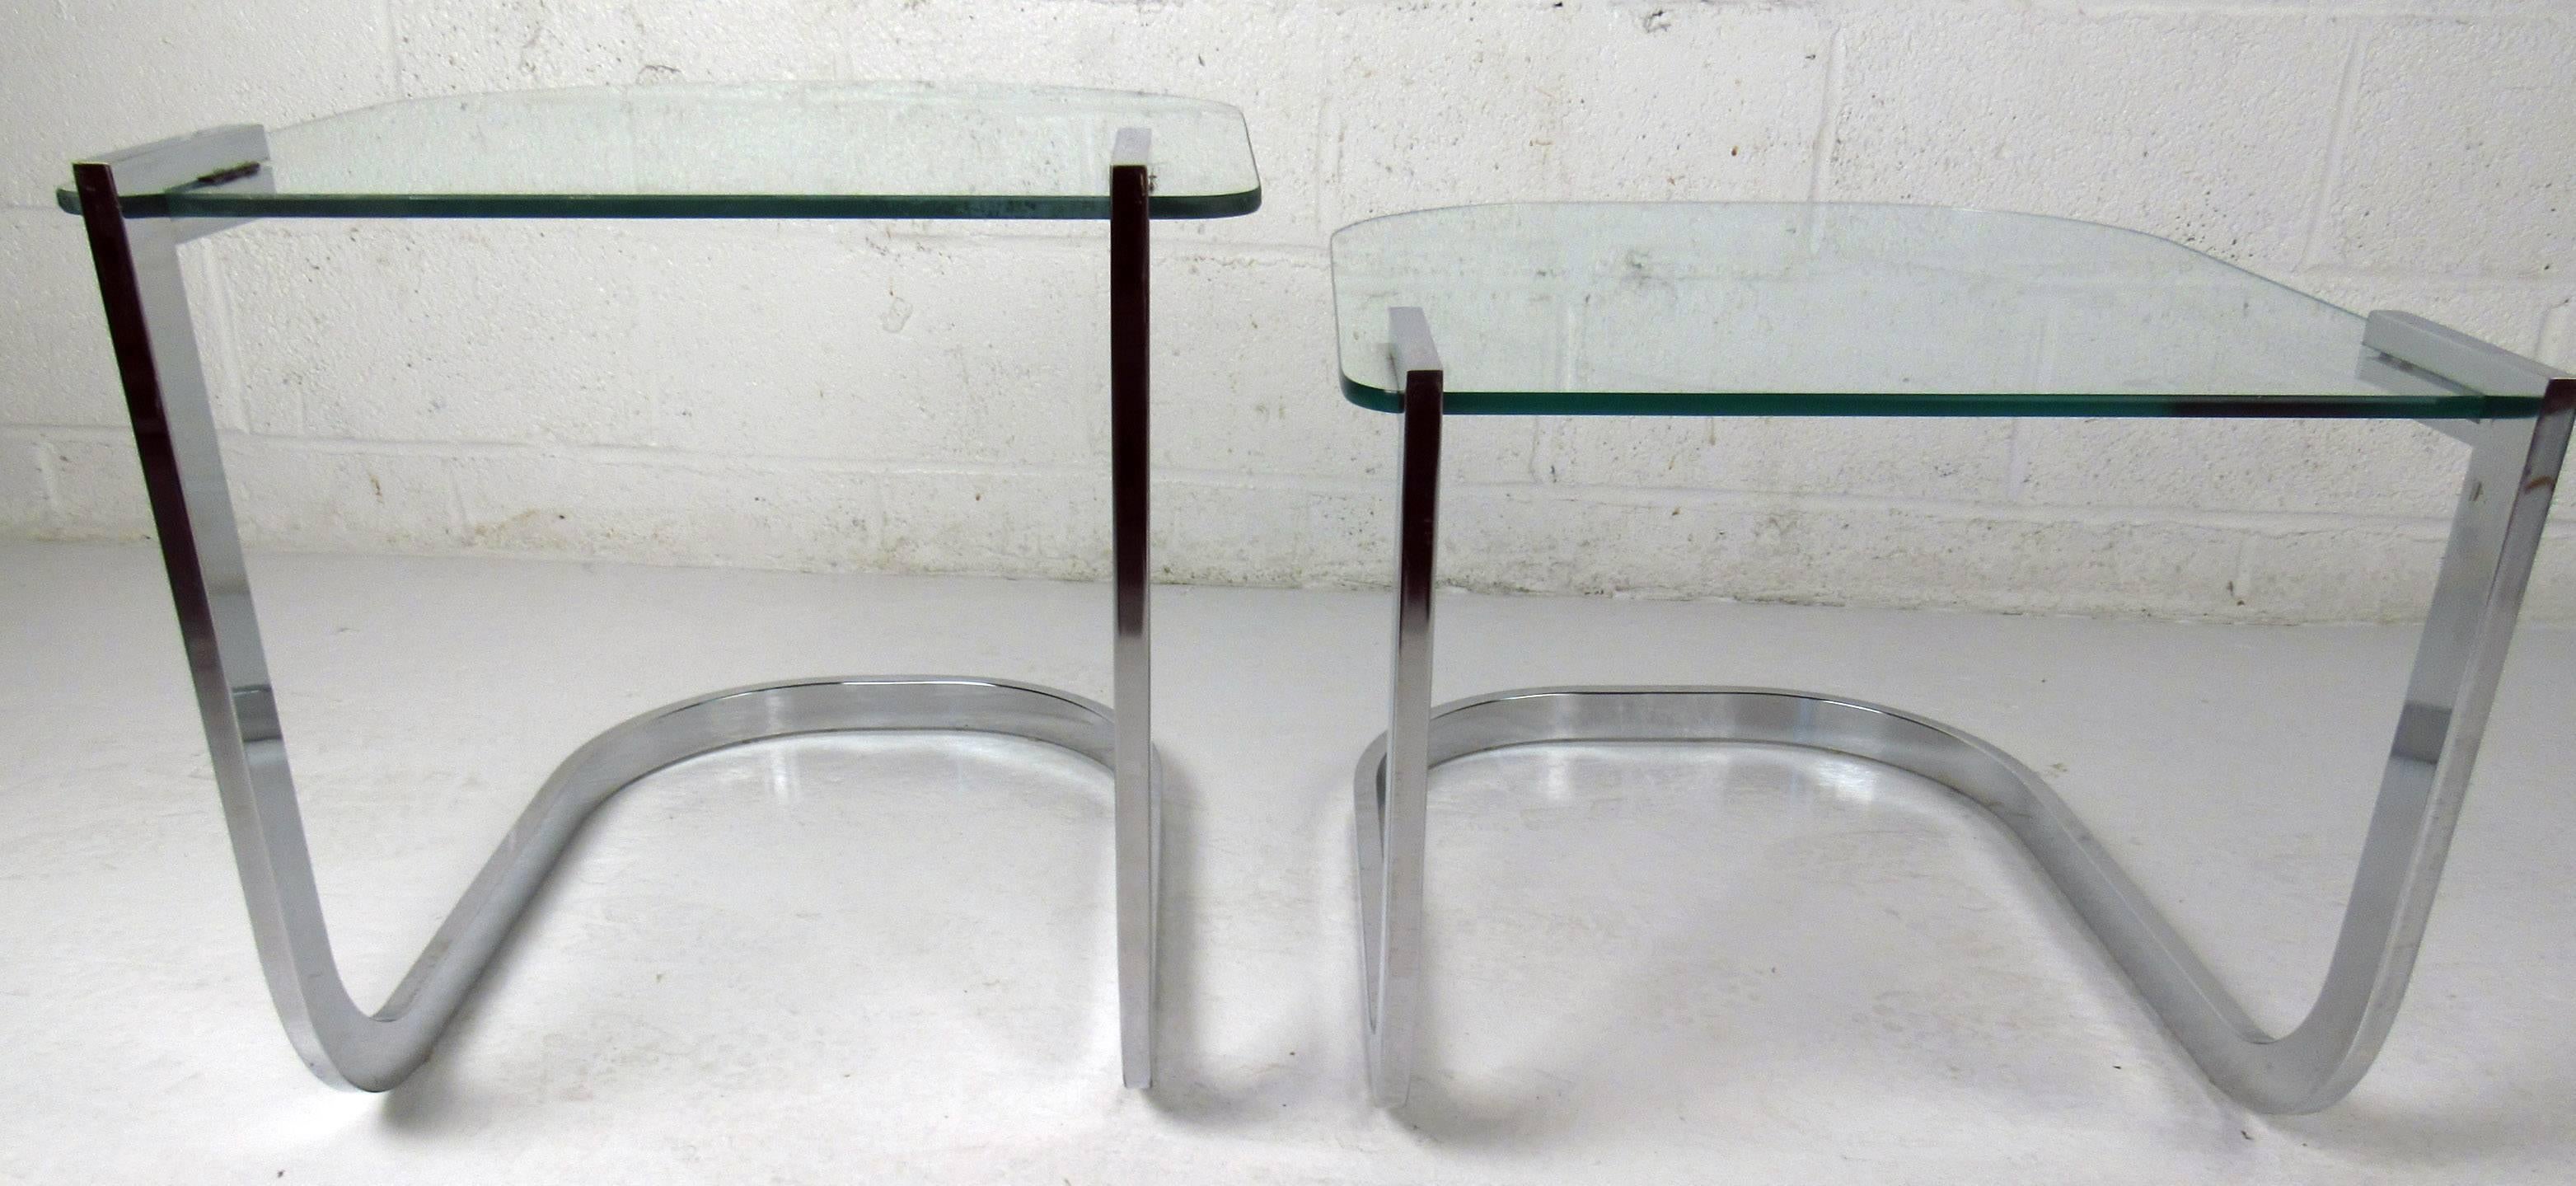 Two stacking vintage-modern nesting tables by Design Institute Of American, features bent chrome base and glass top.

Please confirm item location NY or NJ with dealer.